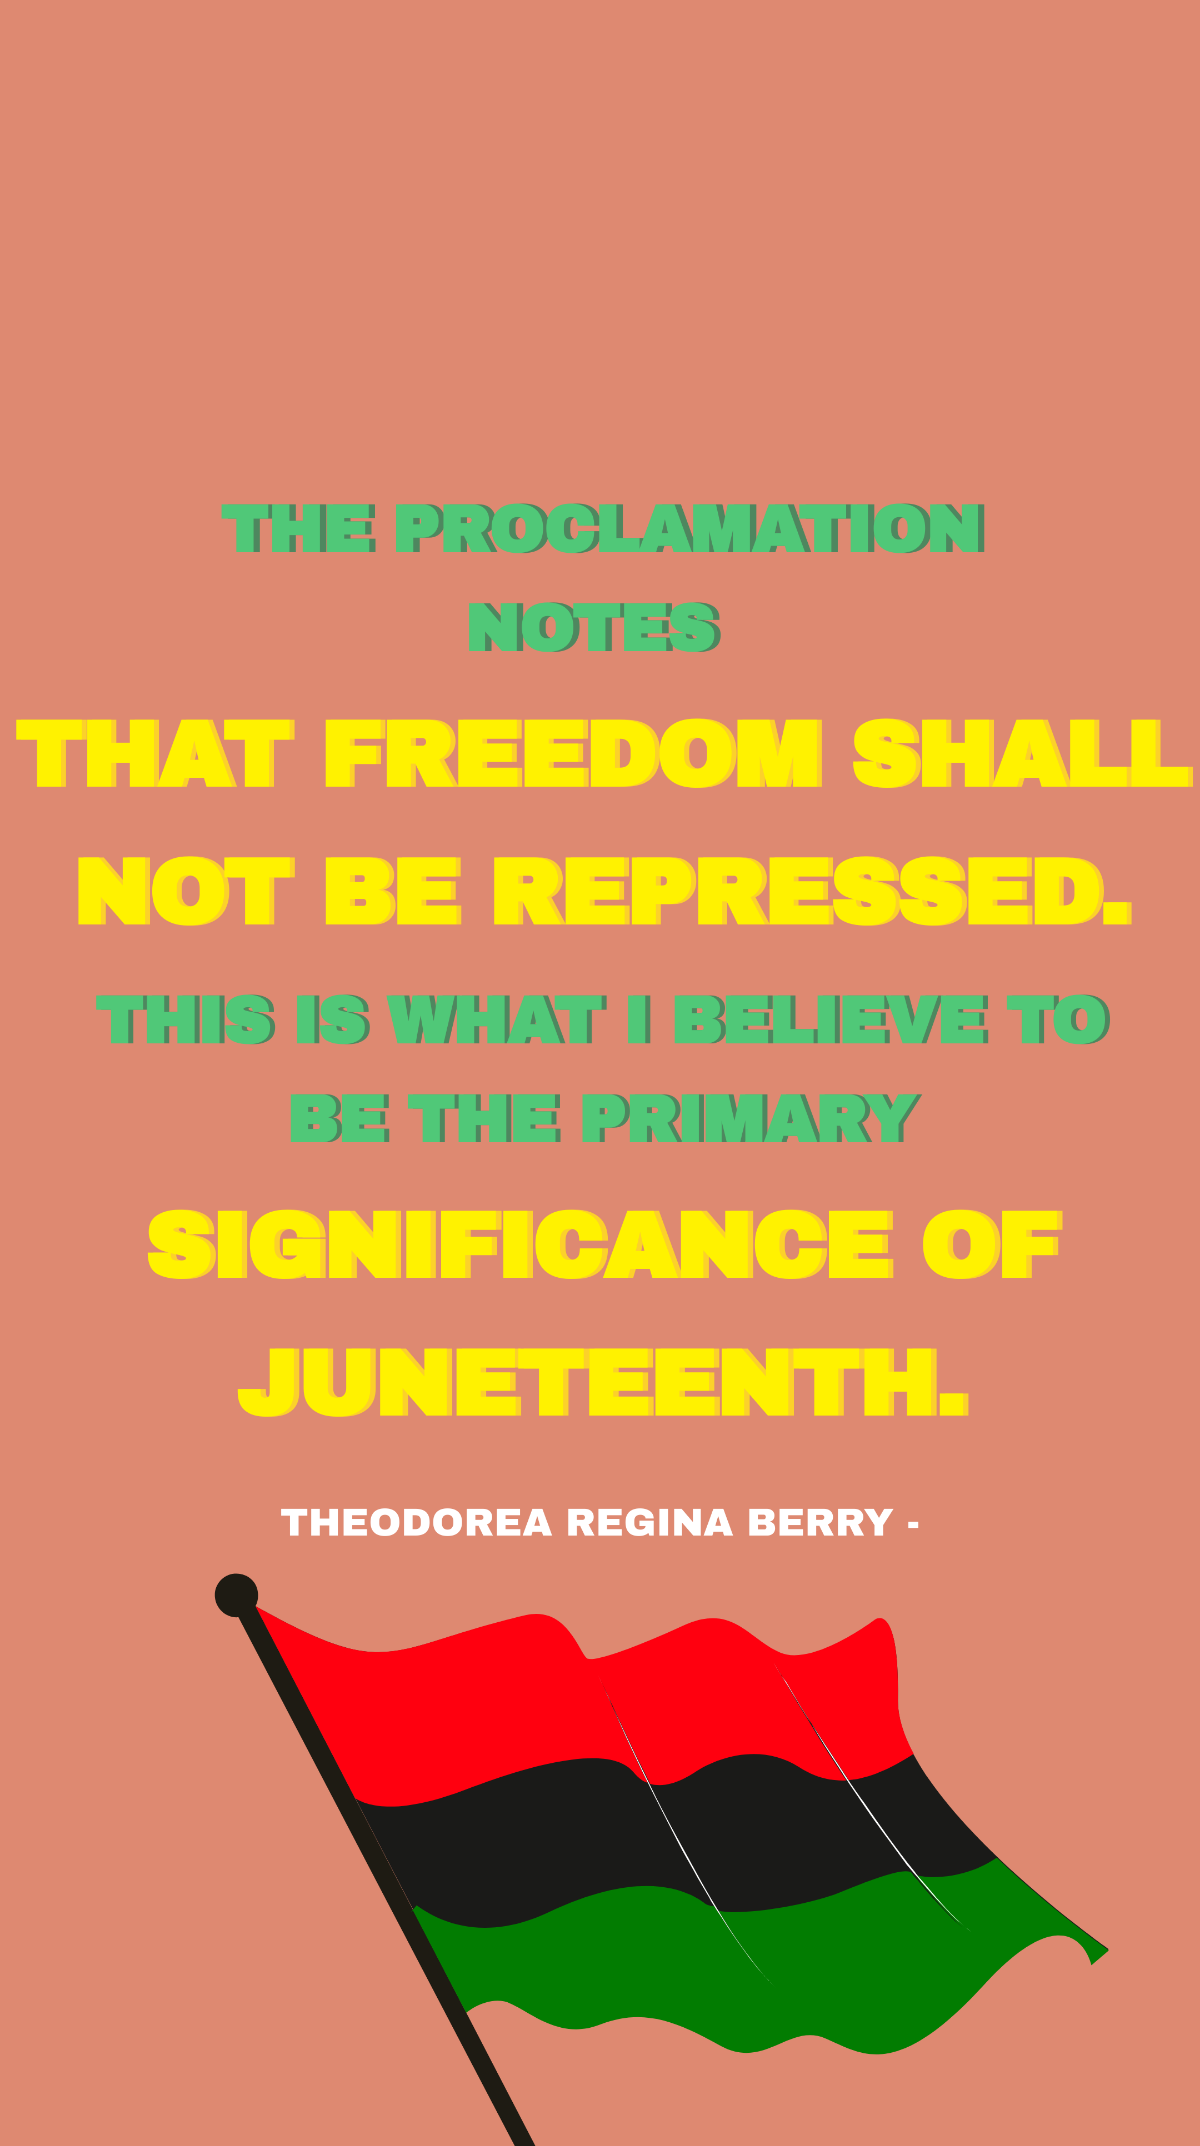 Theodorea Regina Berry - The proclamation notes that freedom shall not be repressed. This is what I believe to be the primary significance of Juneteenth. Template